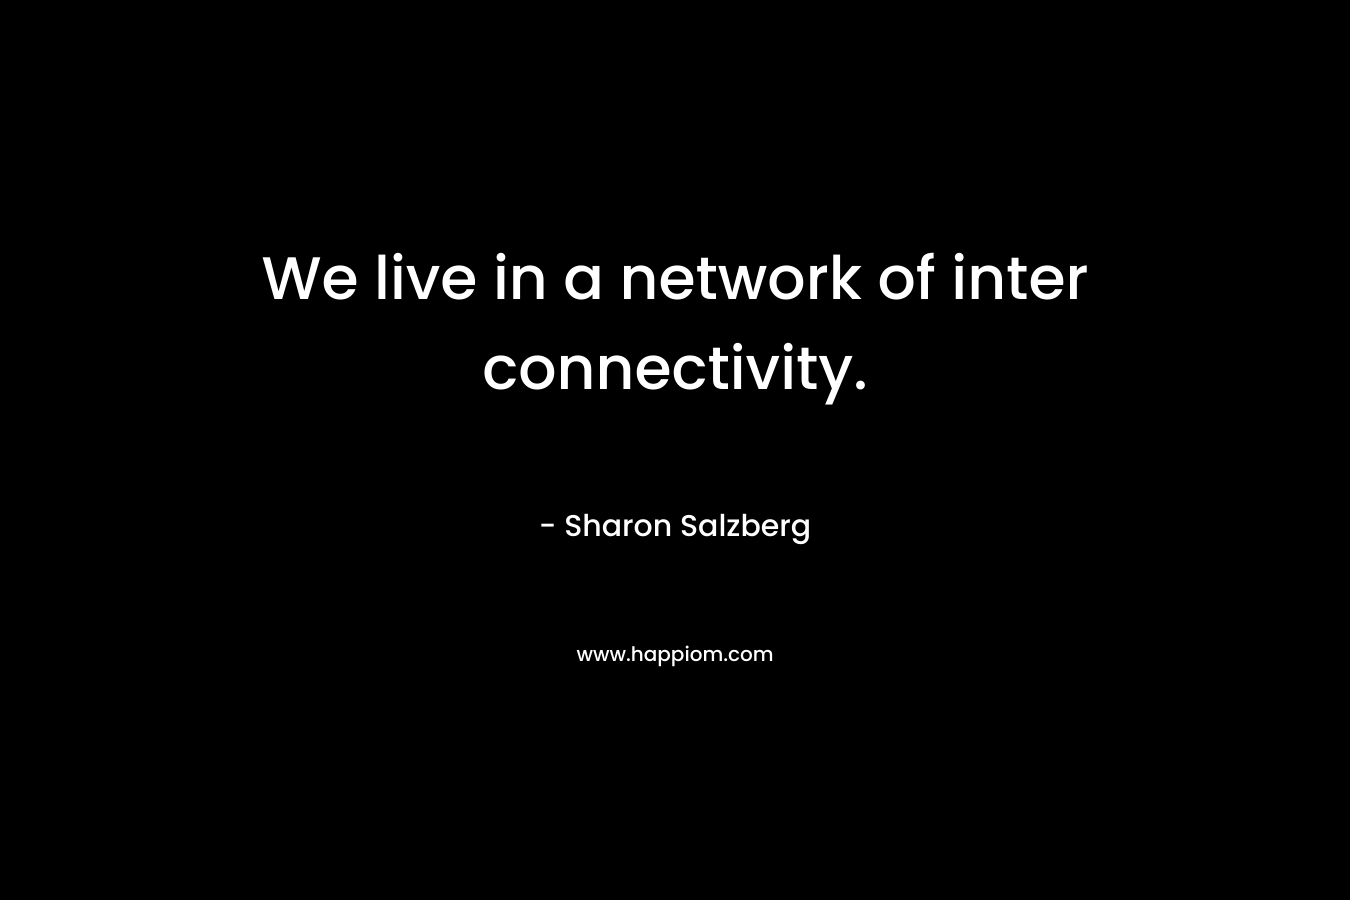 We live in a network of inter connectivity.